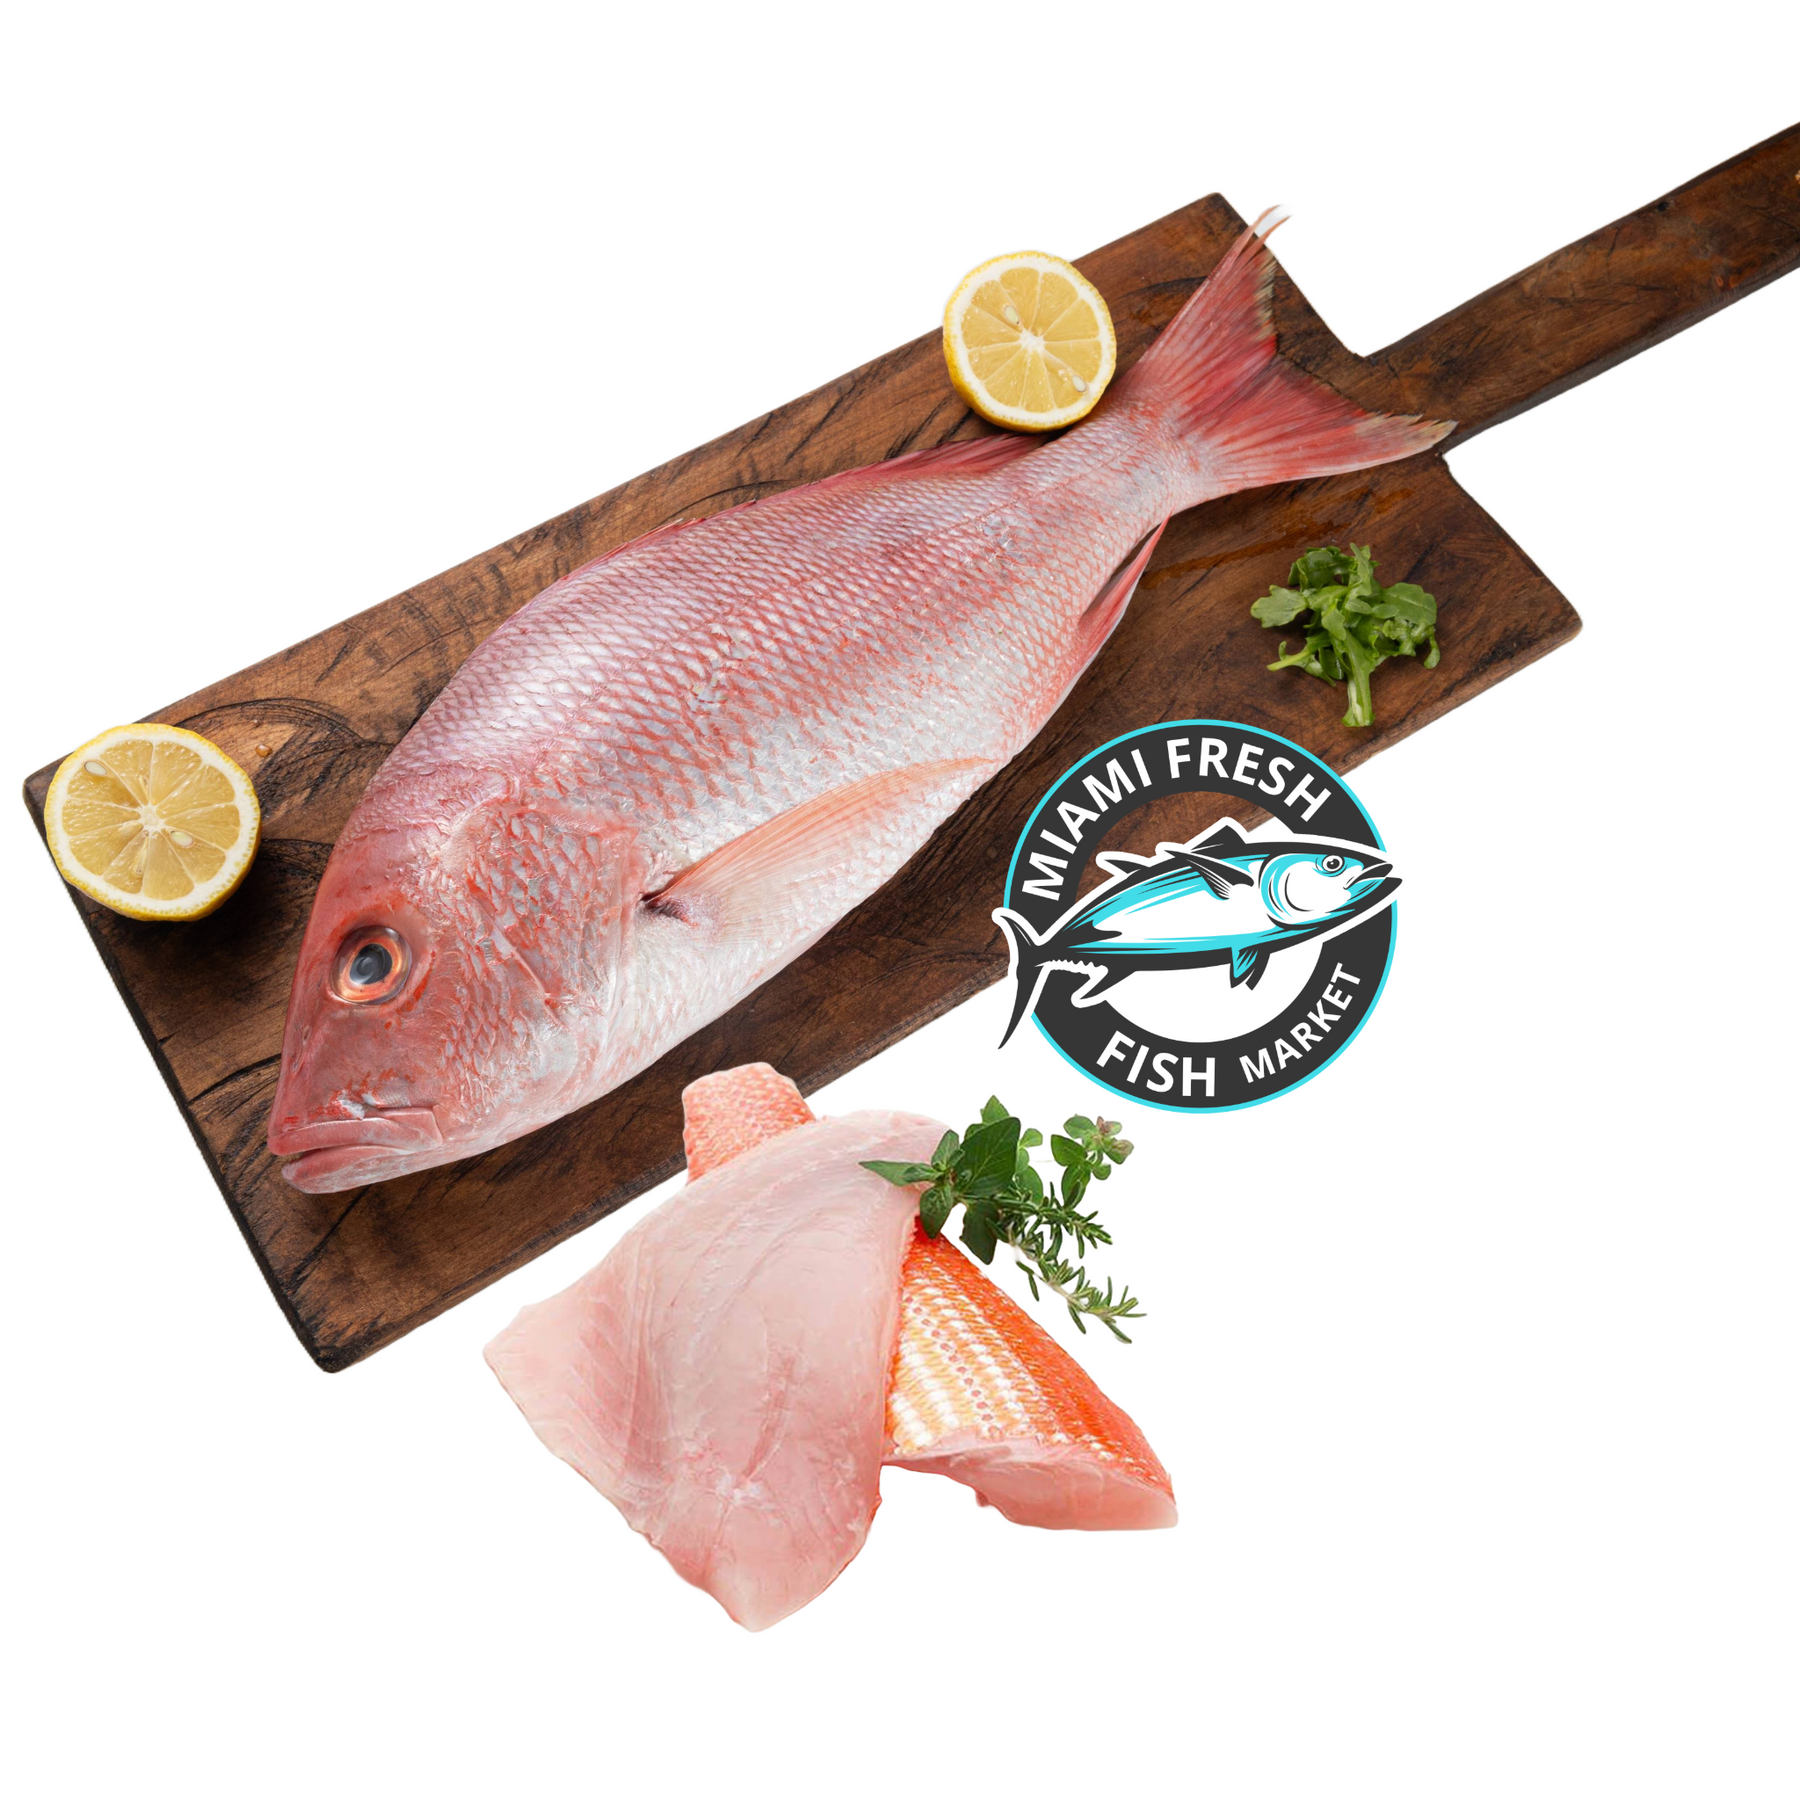 Red Snapper Wild  Whole Fish / Fillet by Miami Fresh Fish Market